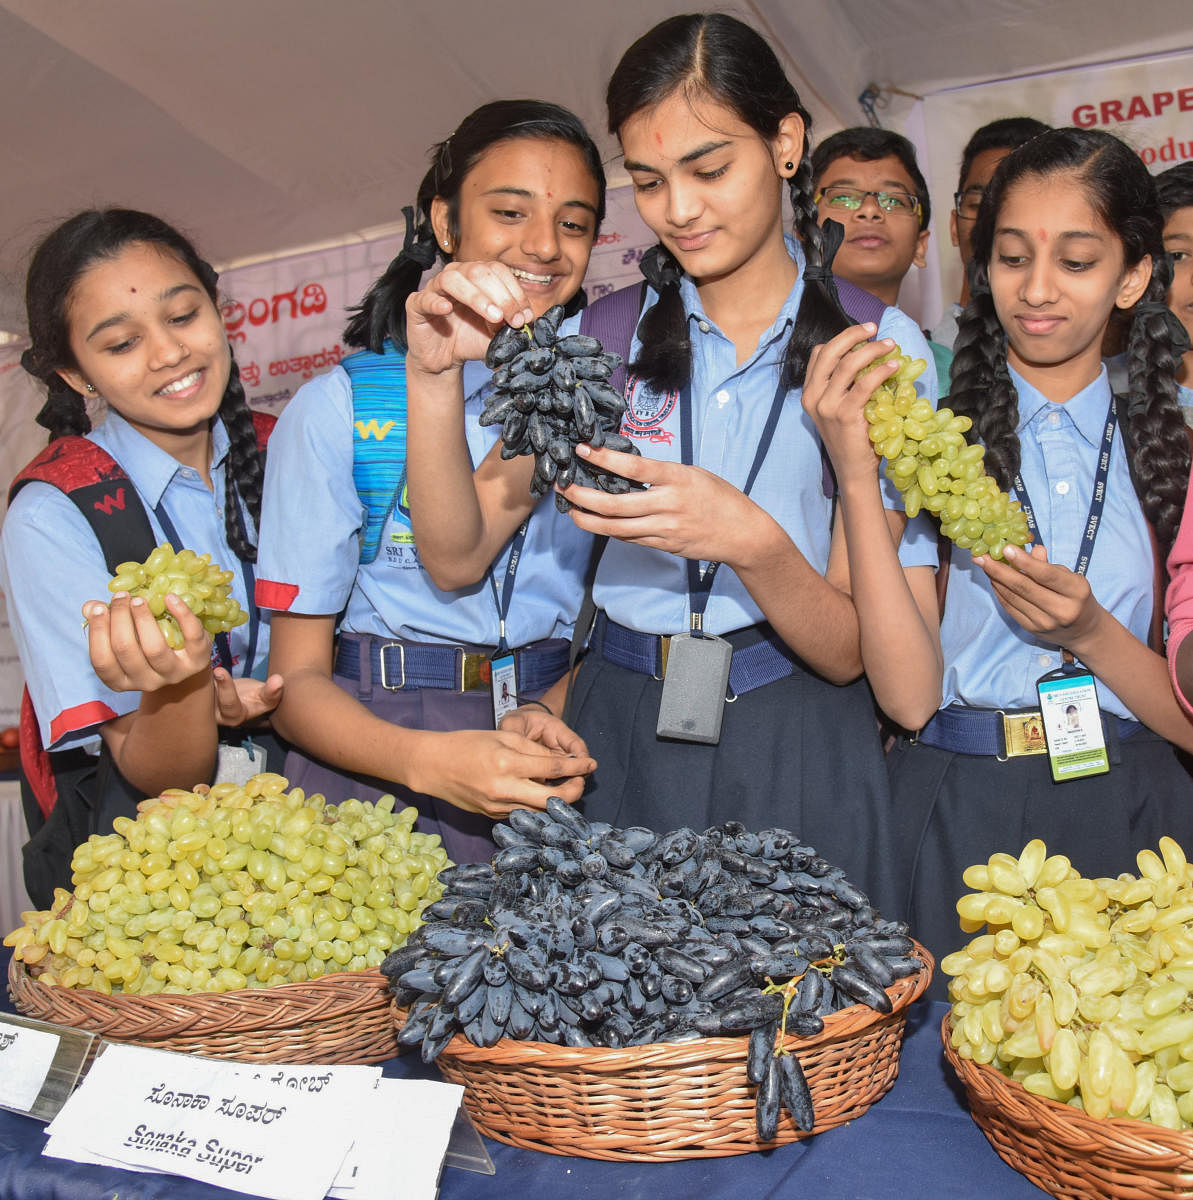 Annual Lalbagh Grape Mela delayed this year